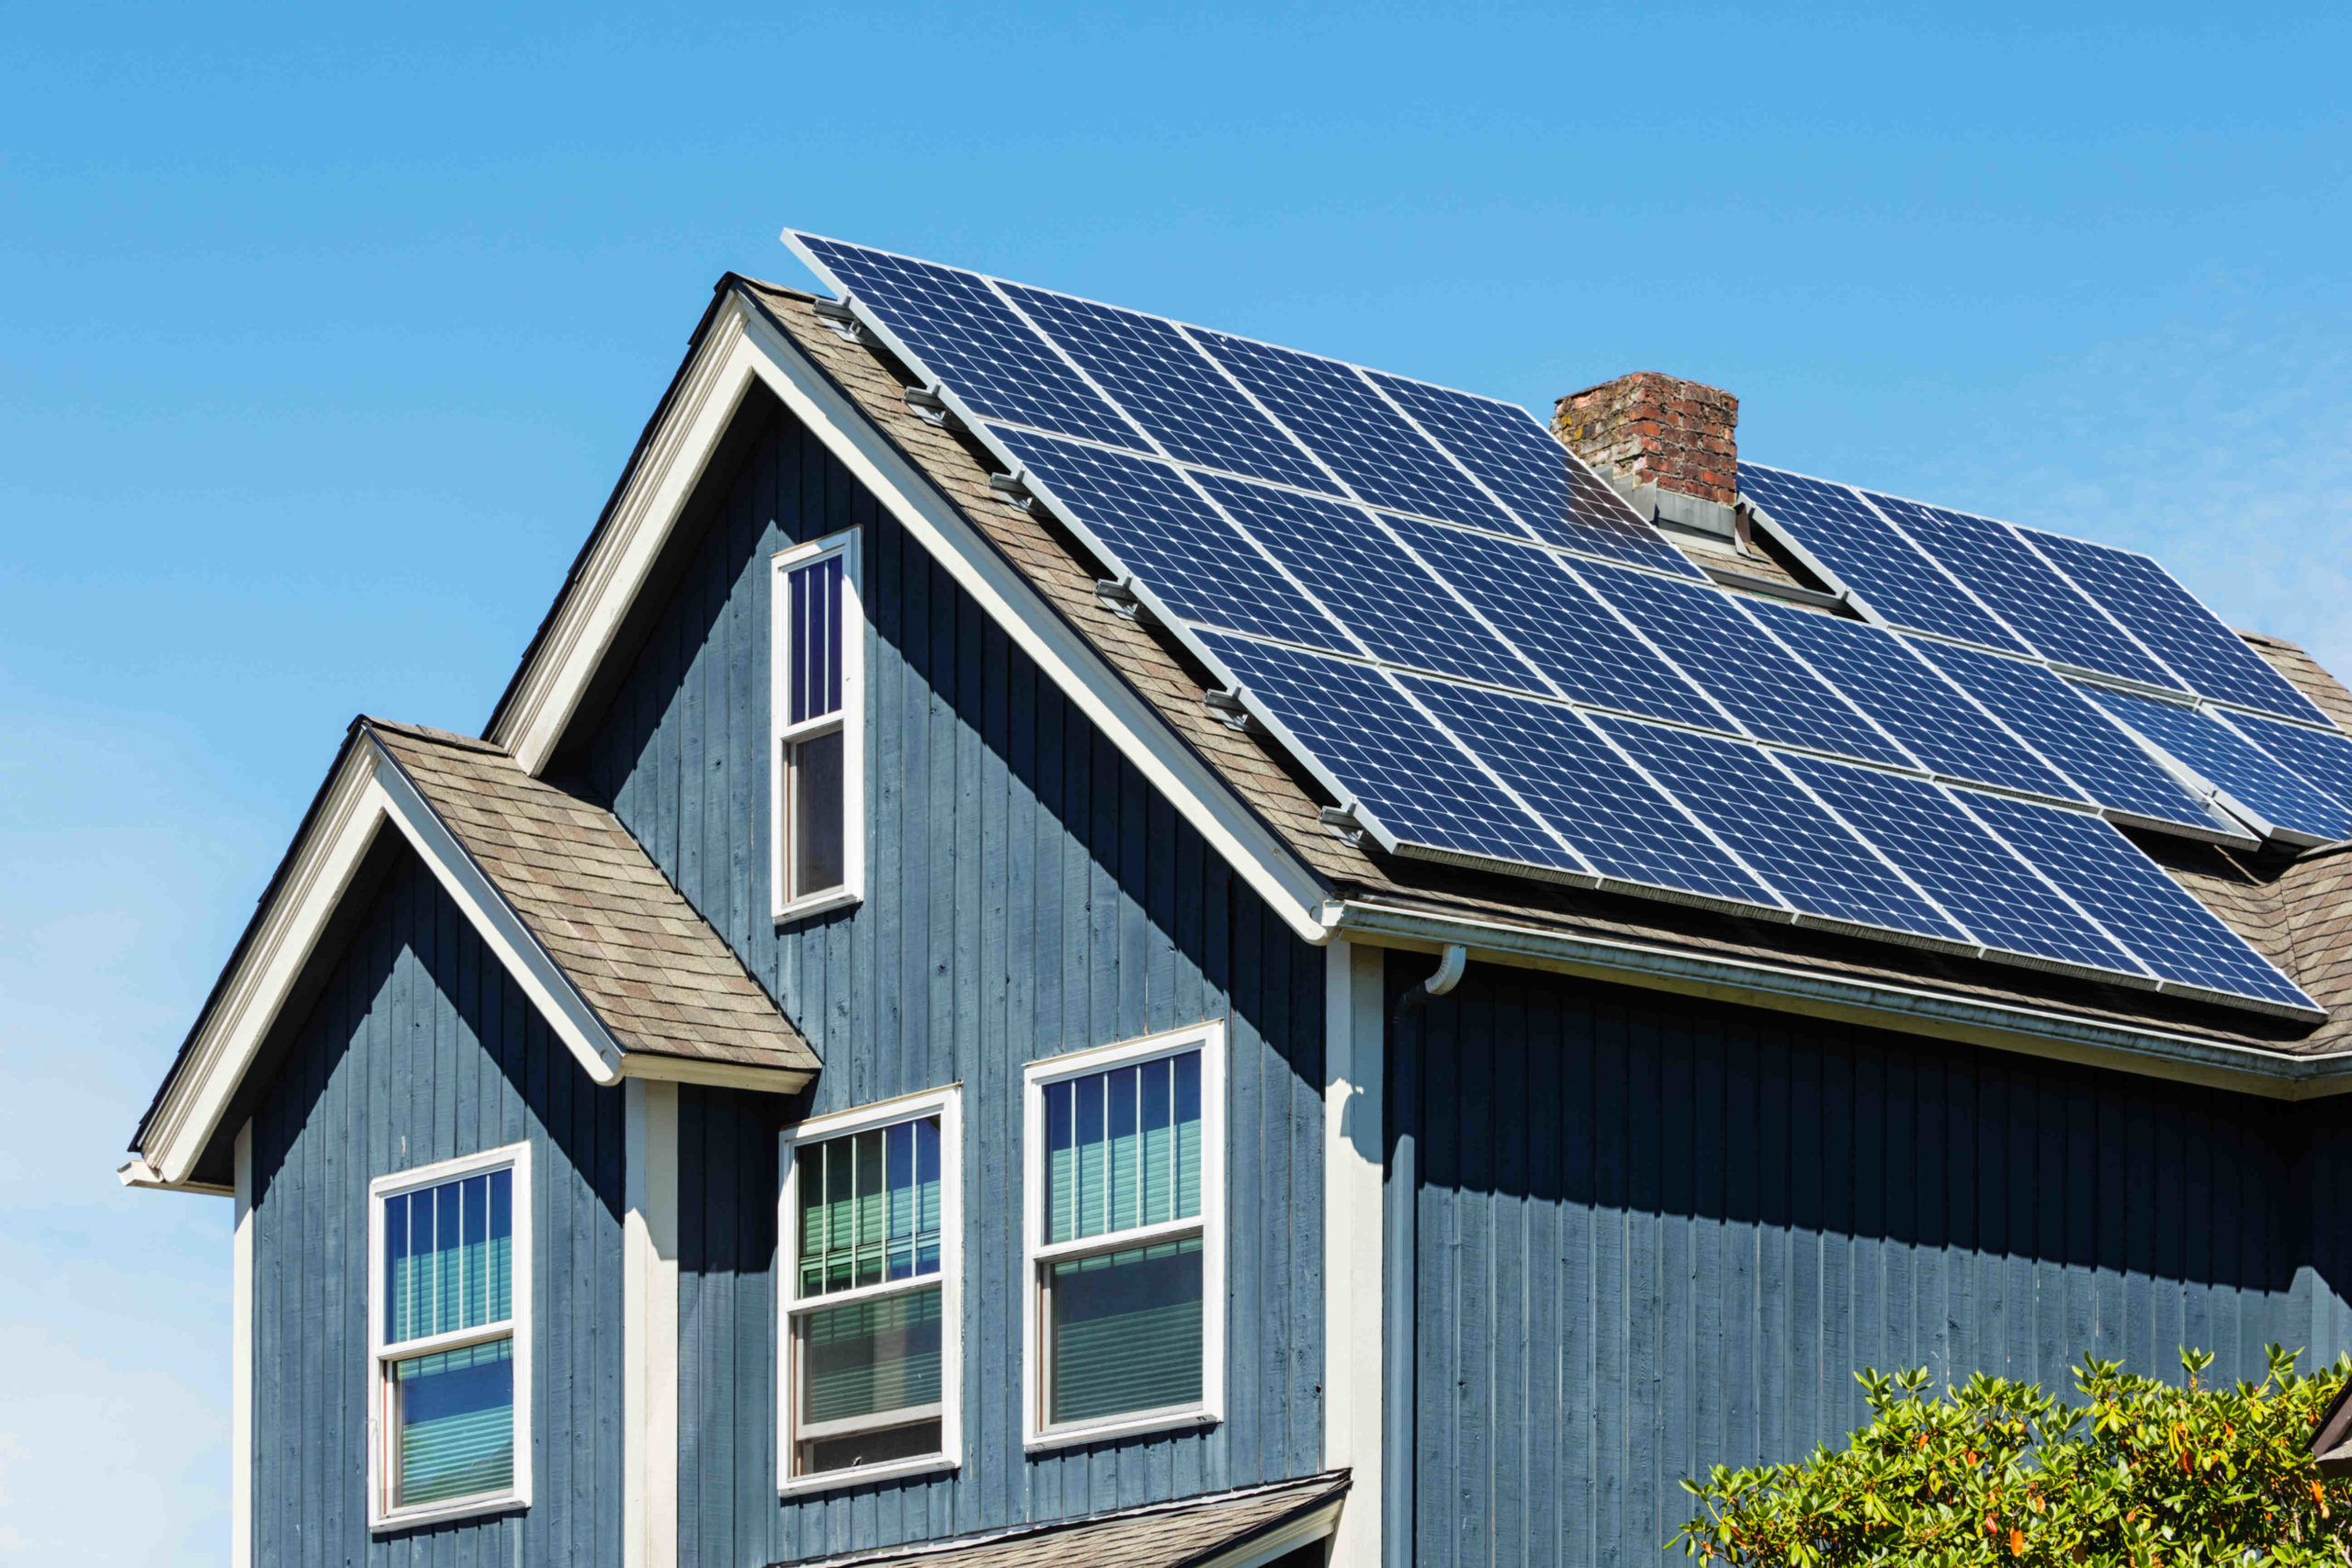 What is roof mounted PV system?